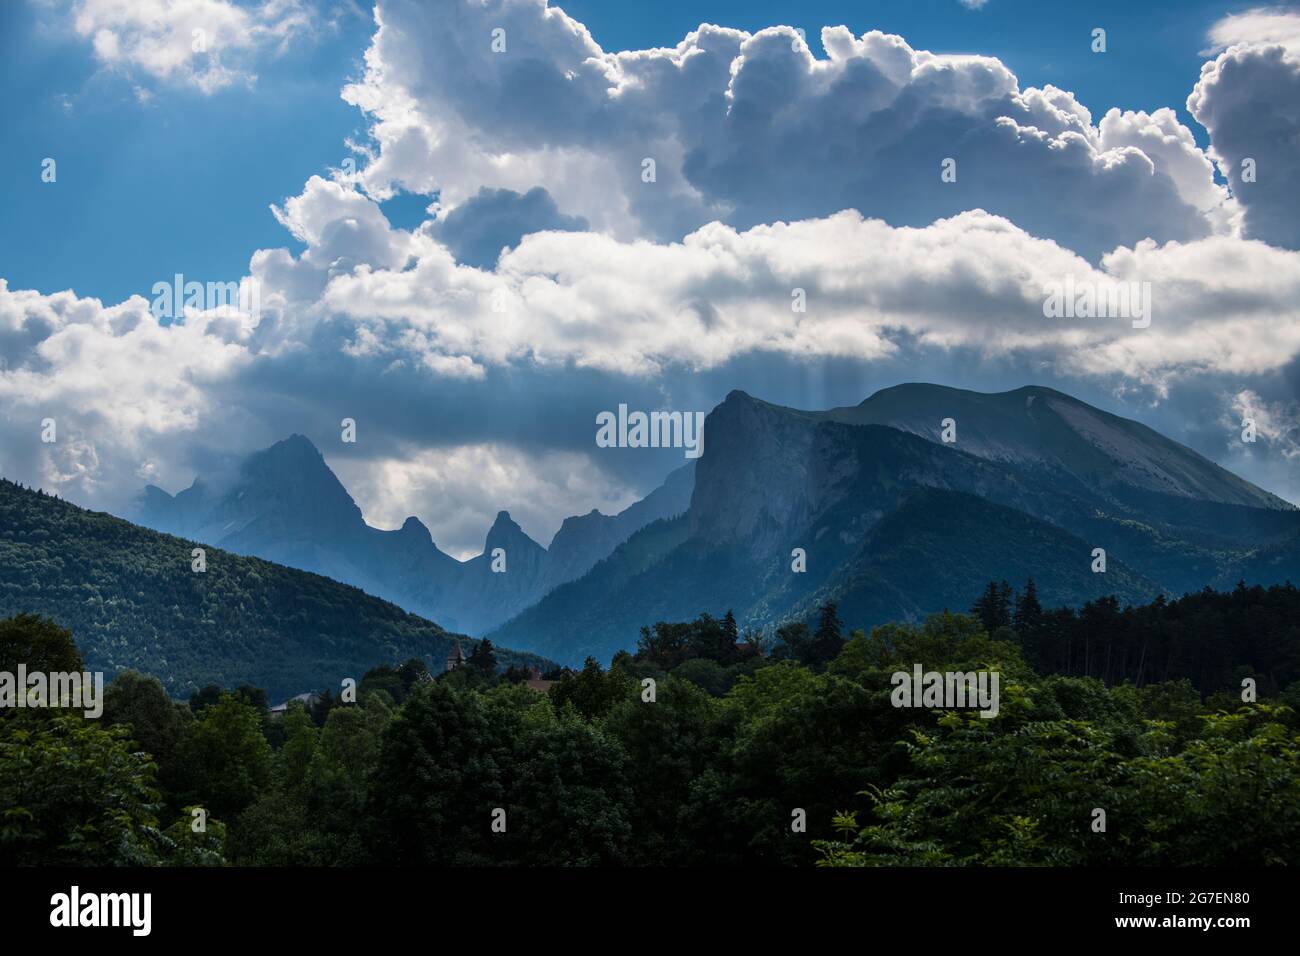 Mountain landscape with mountain peaks, forest and the cloudy blue sky, by stormy weather Stock Photo